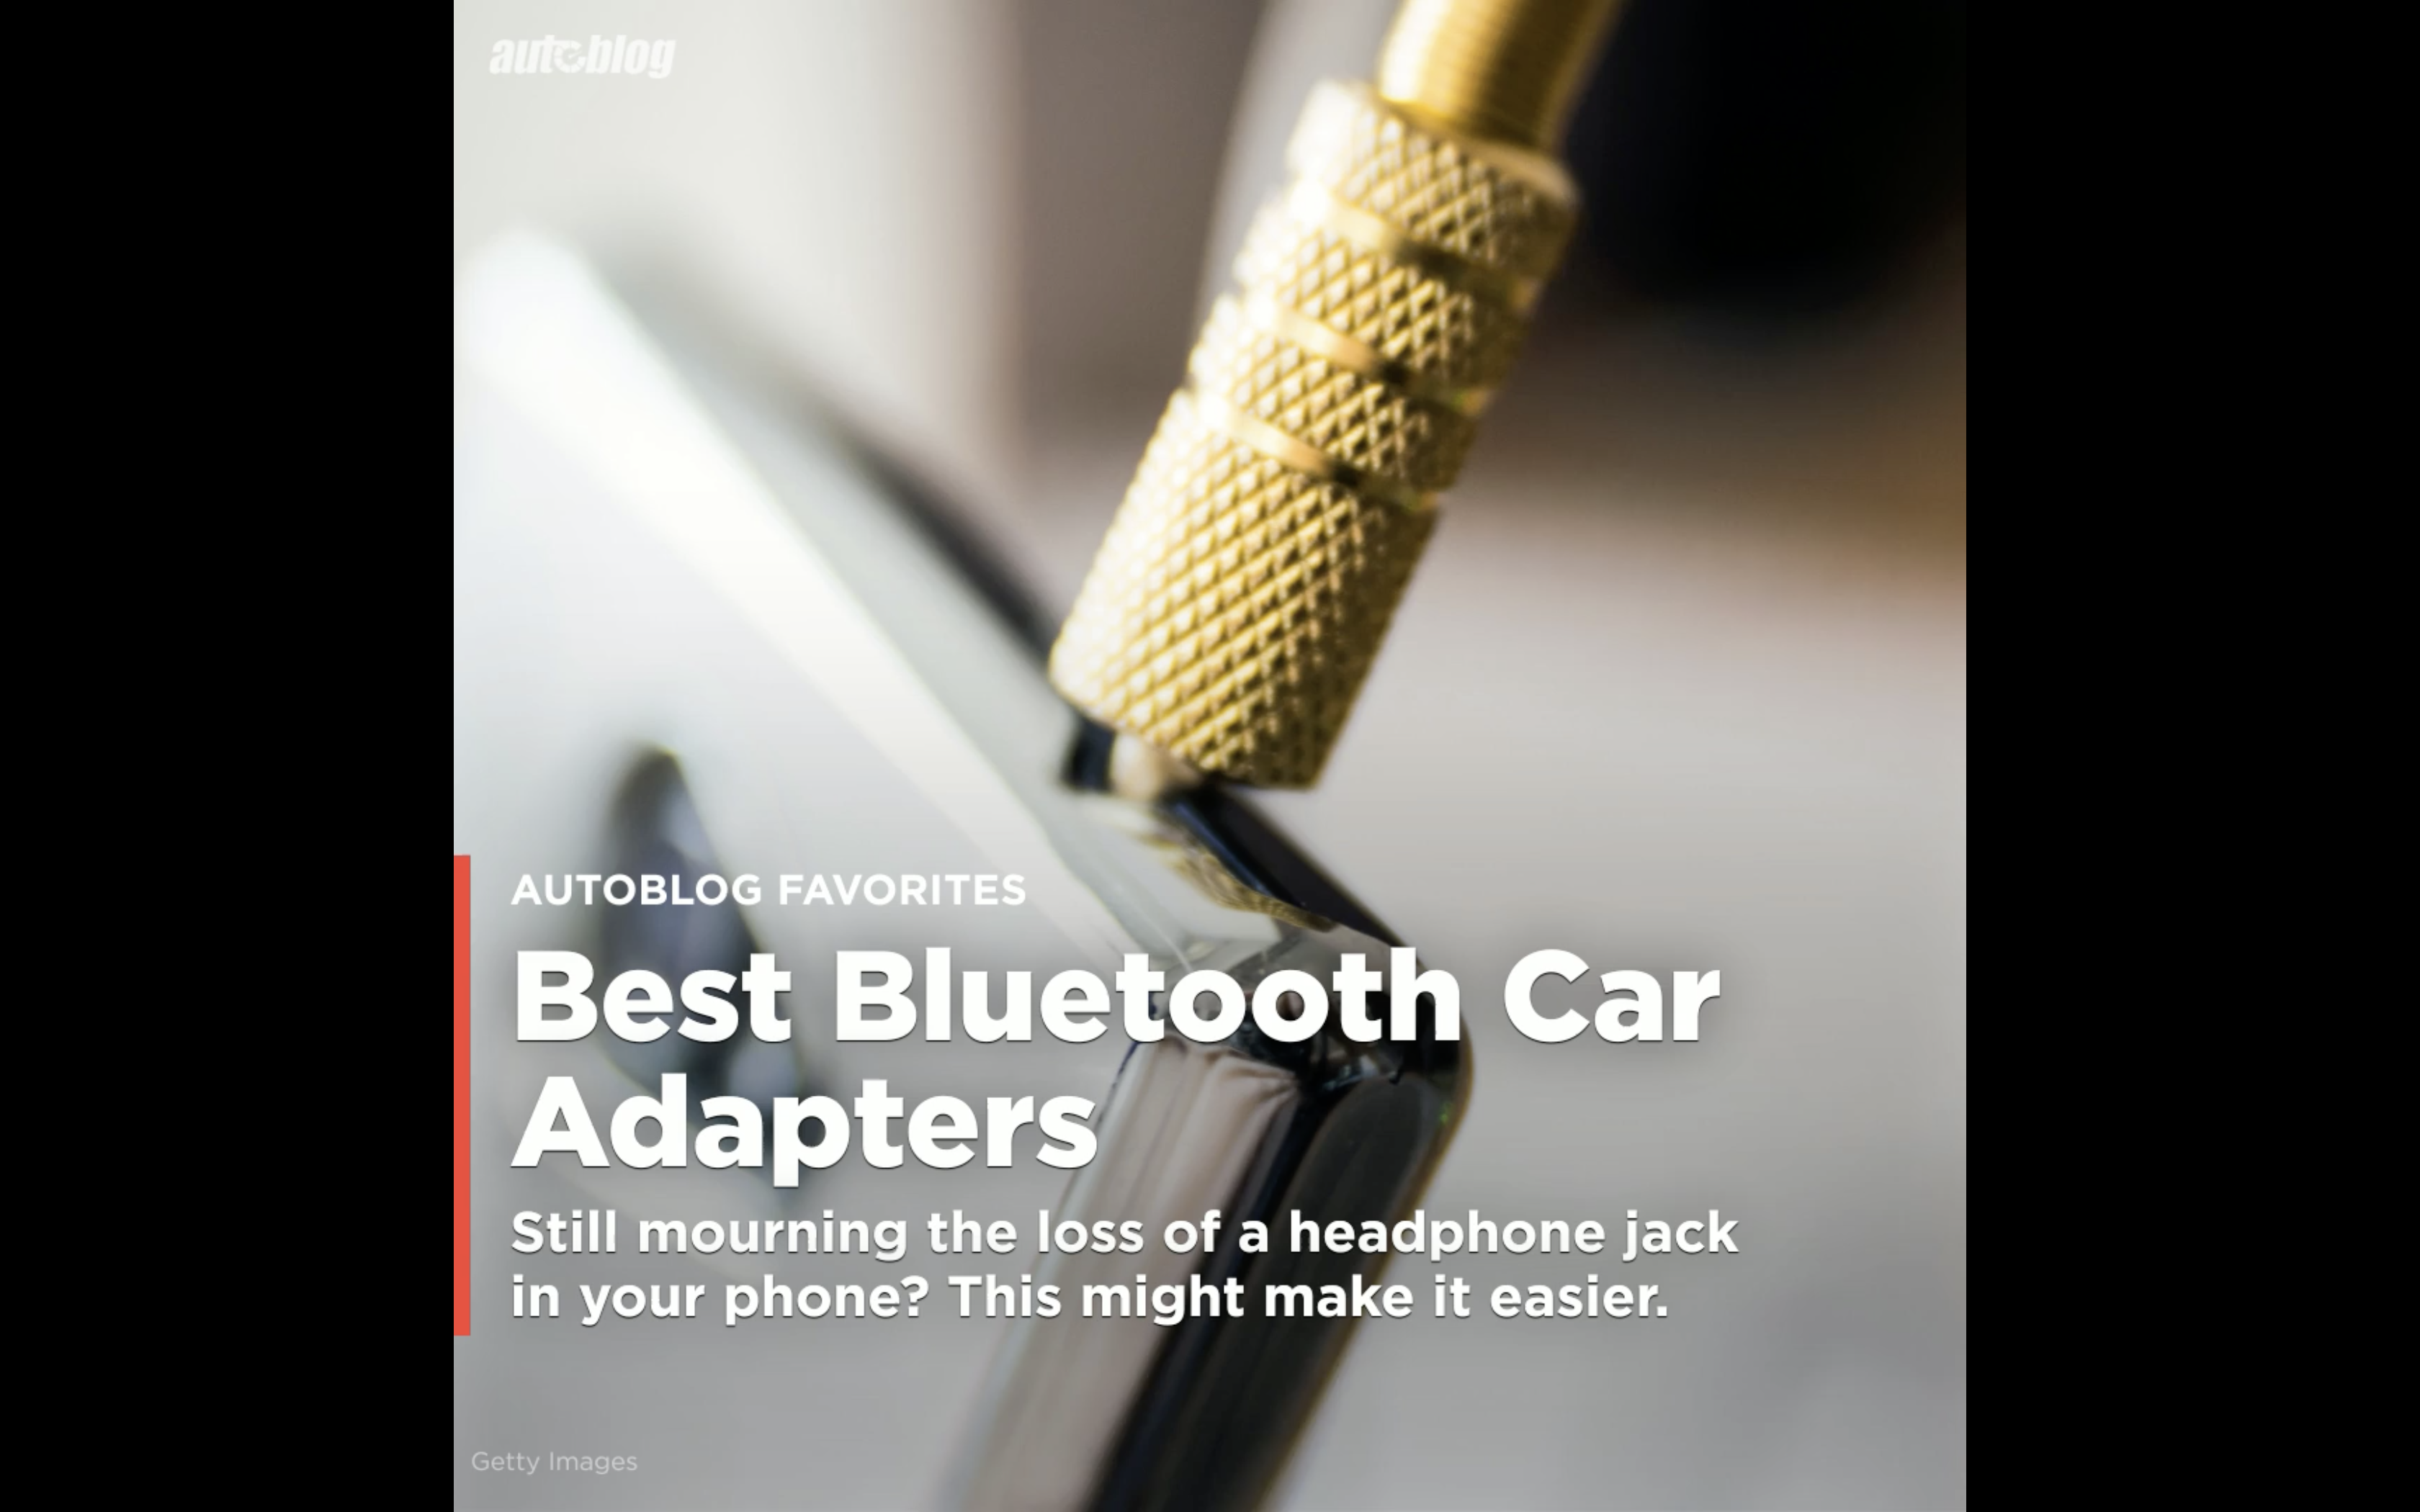 4 of our favorite bluetooth car adapters - Autoblog